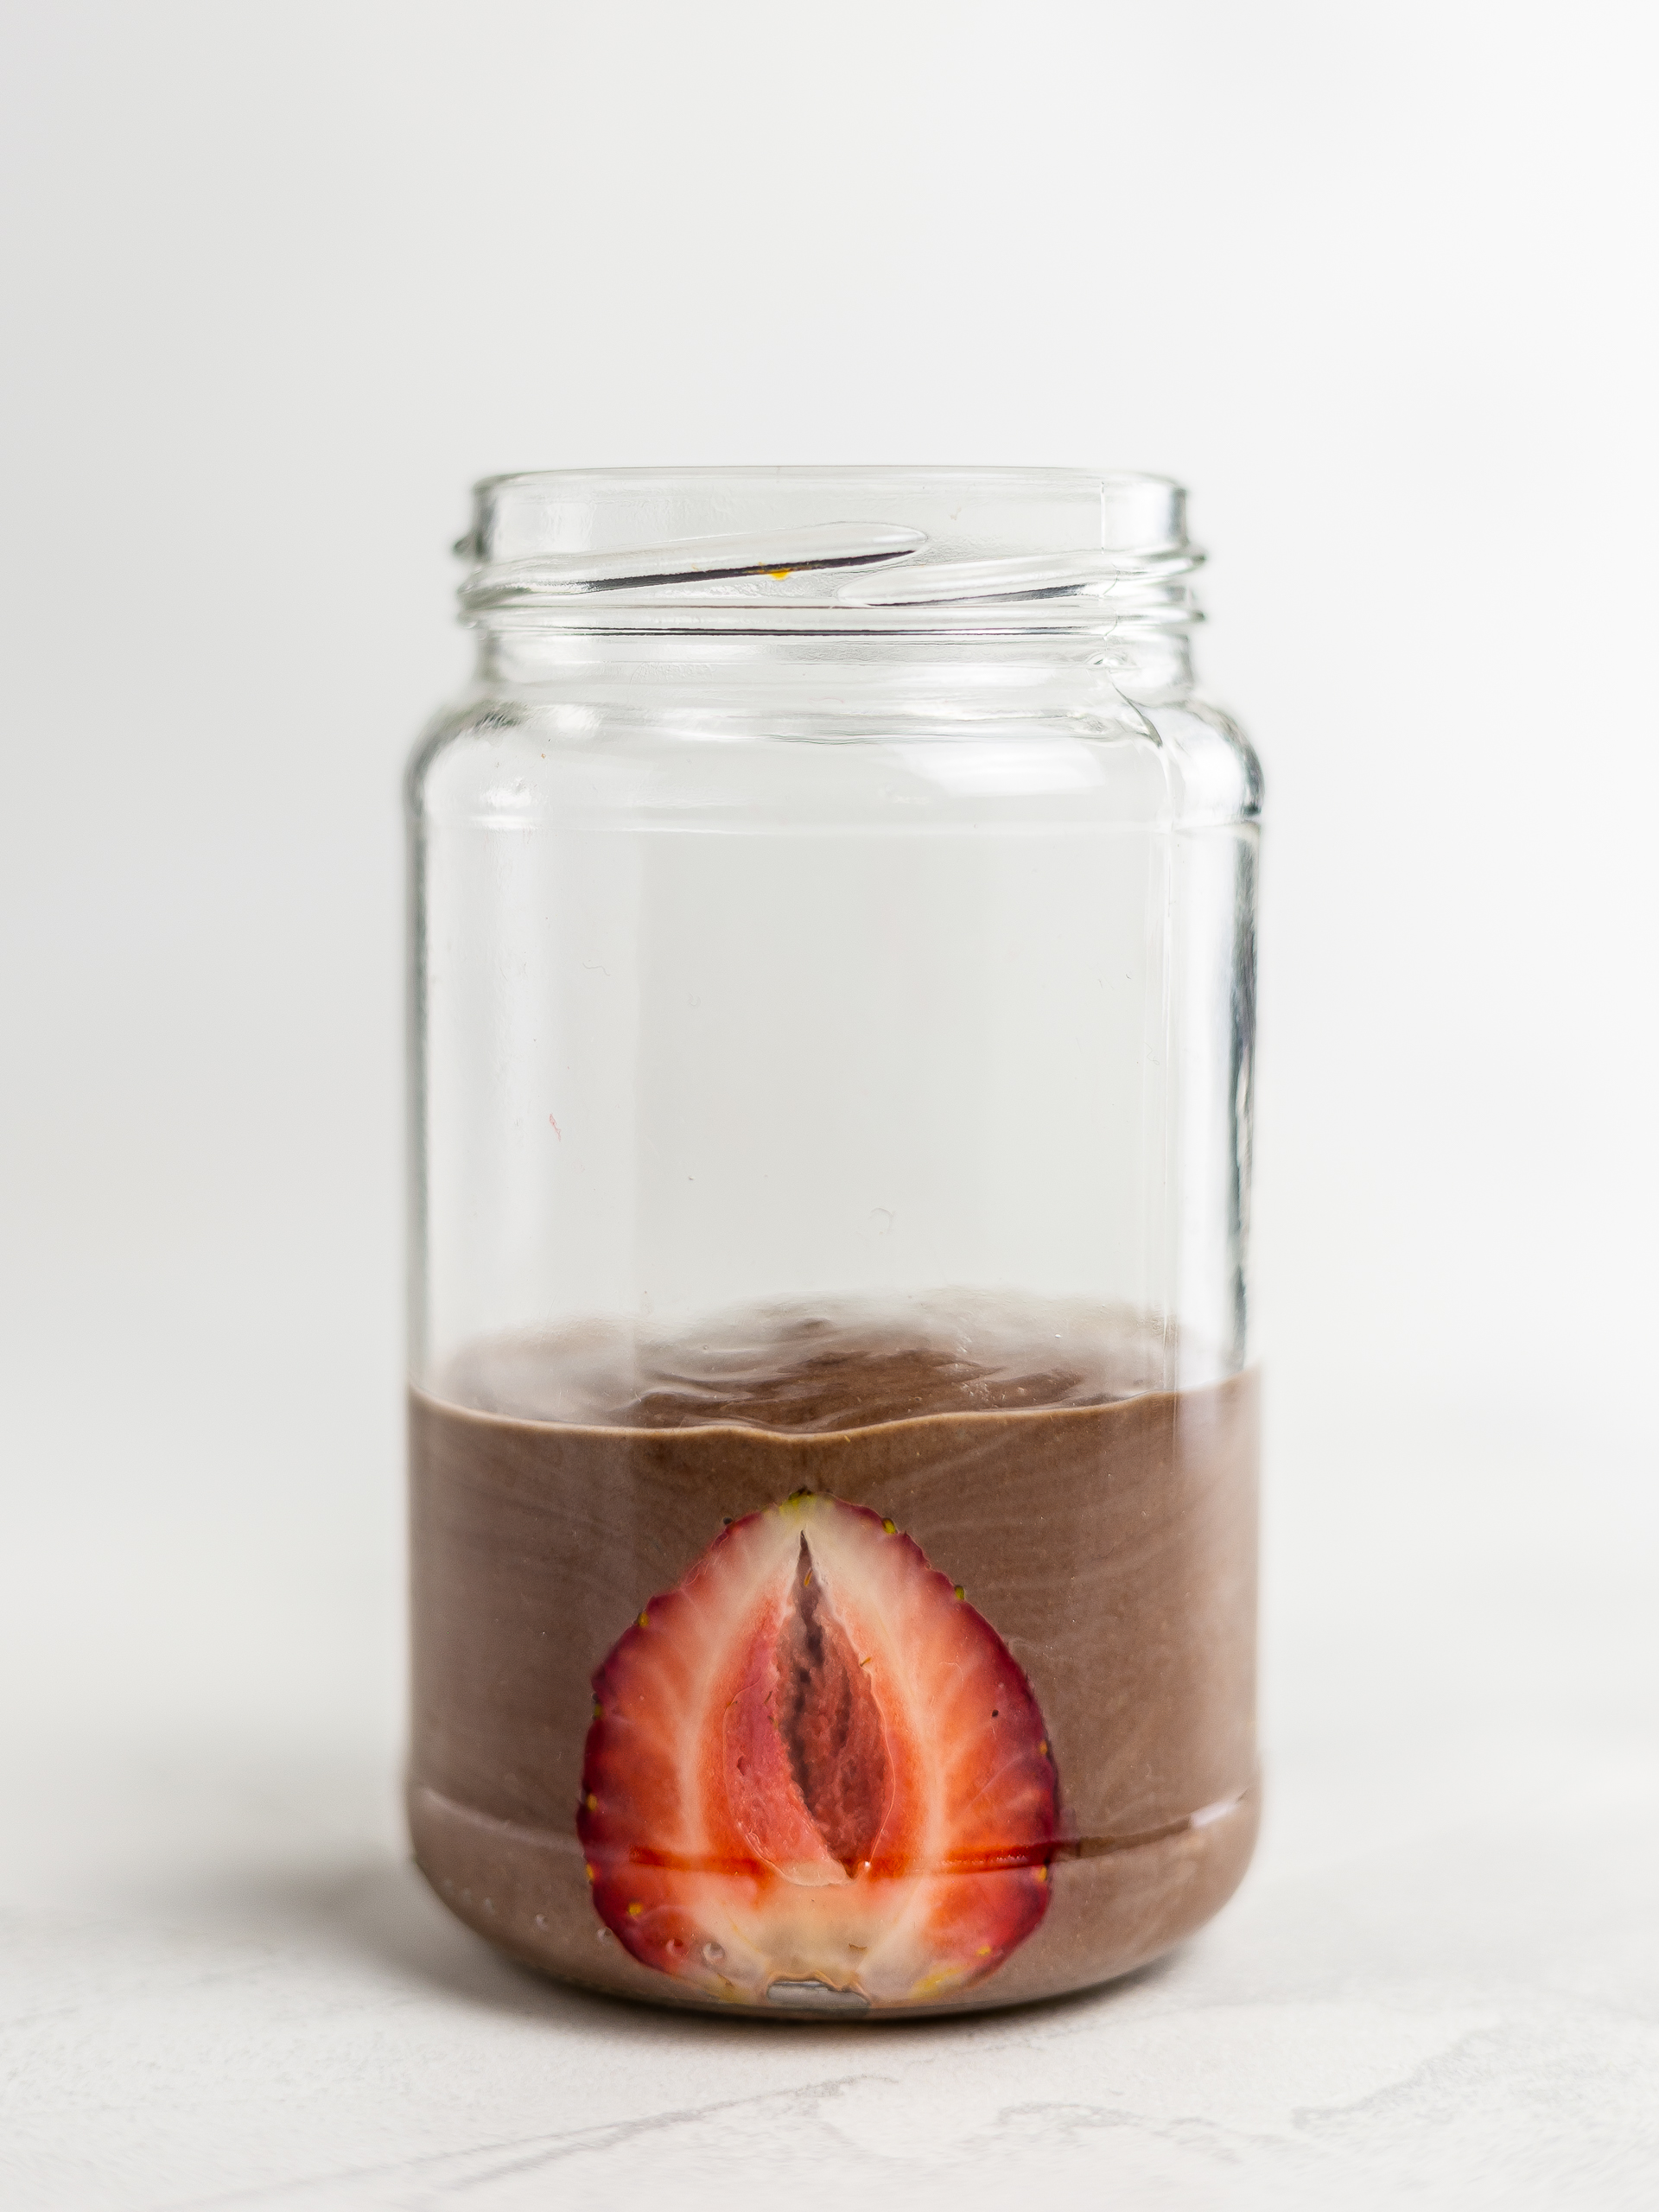 chocolate layered smoothie in a jar